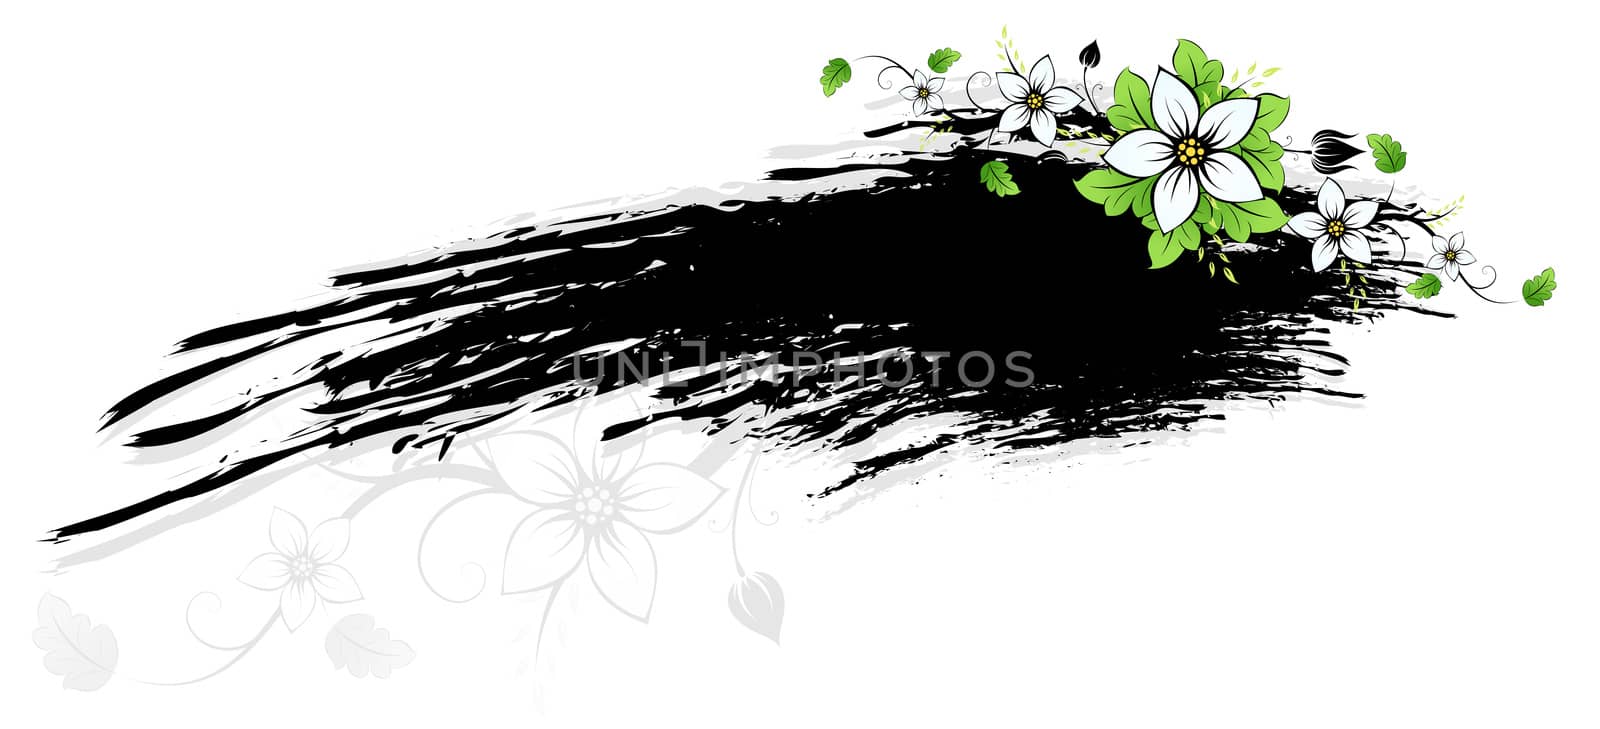 Grunge Vector frame AD with spring flowers and leaves